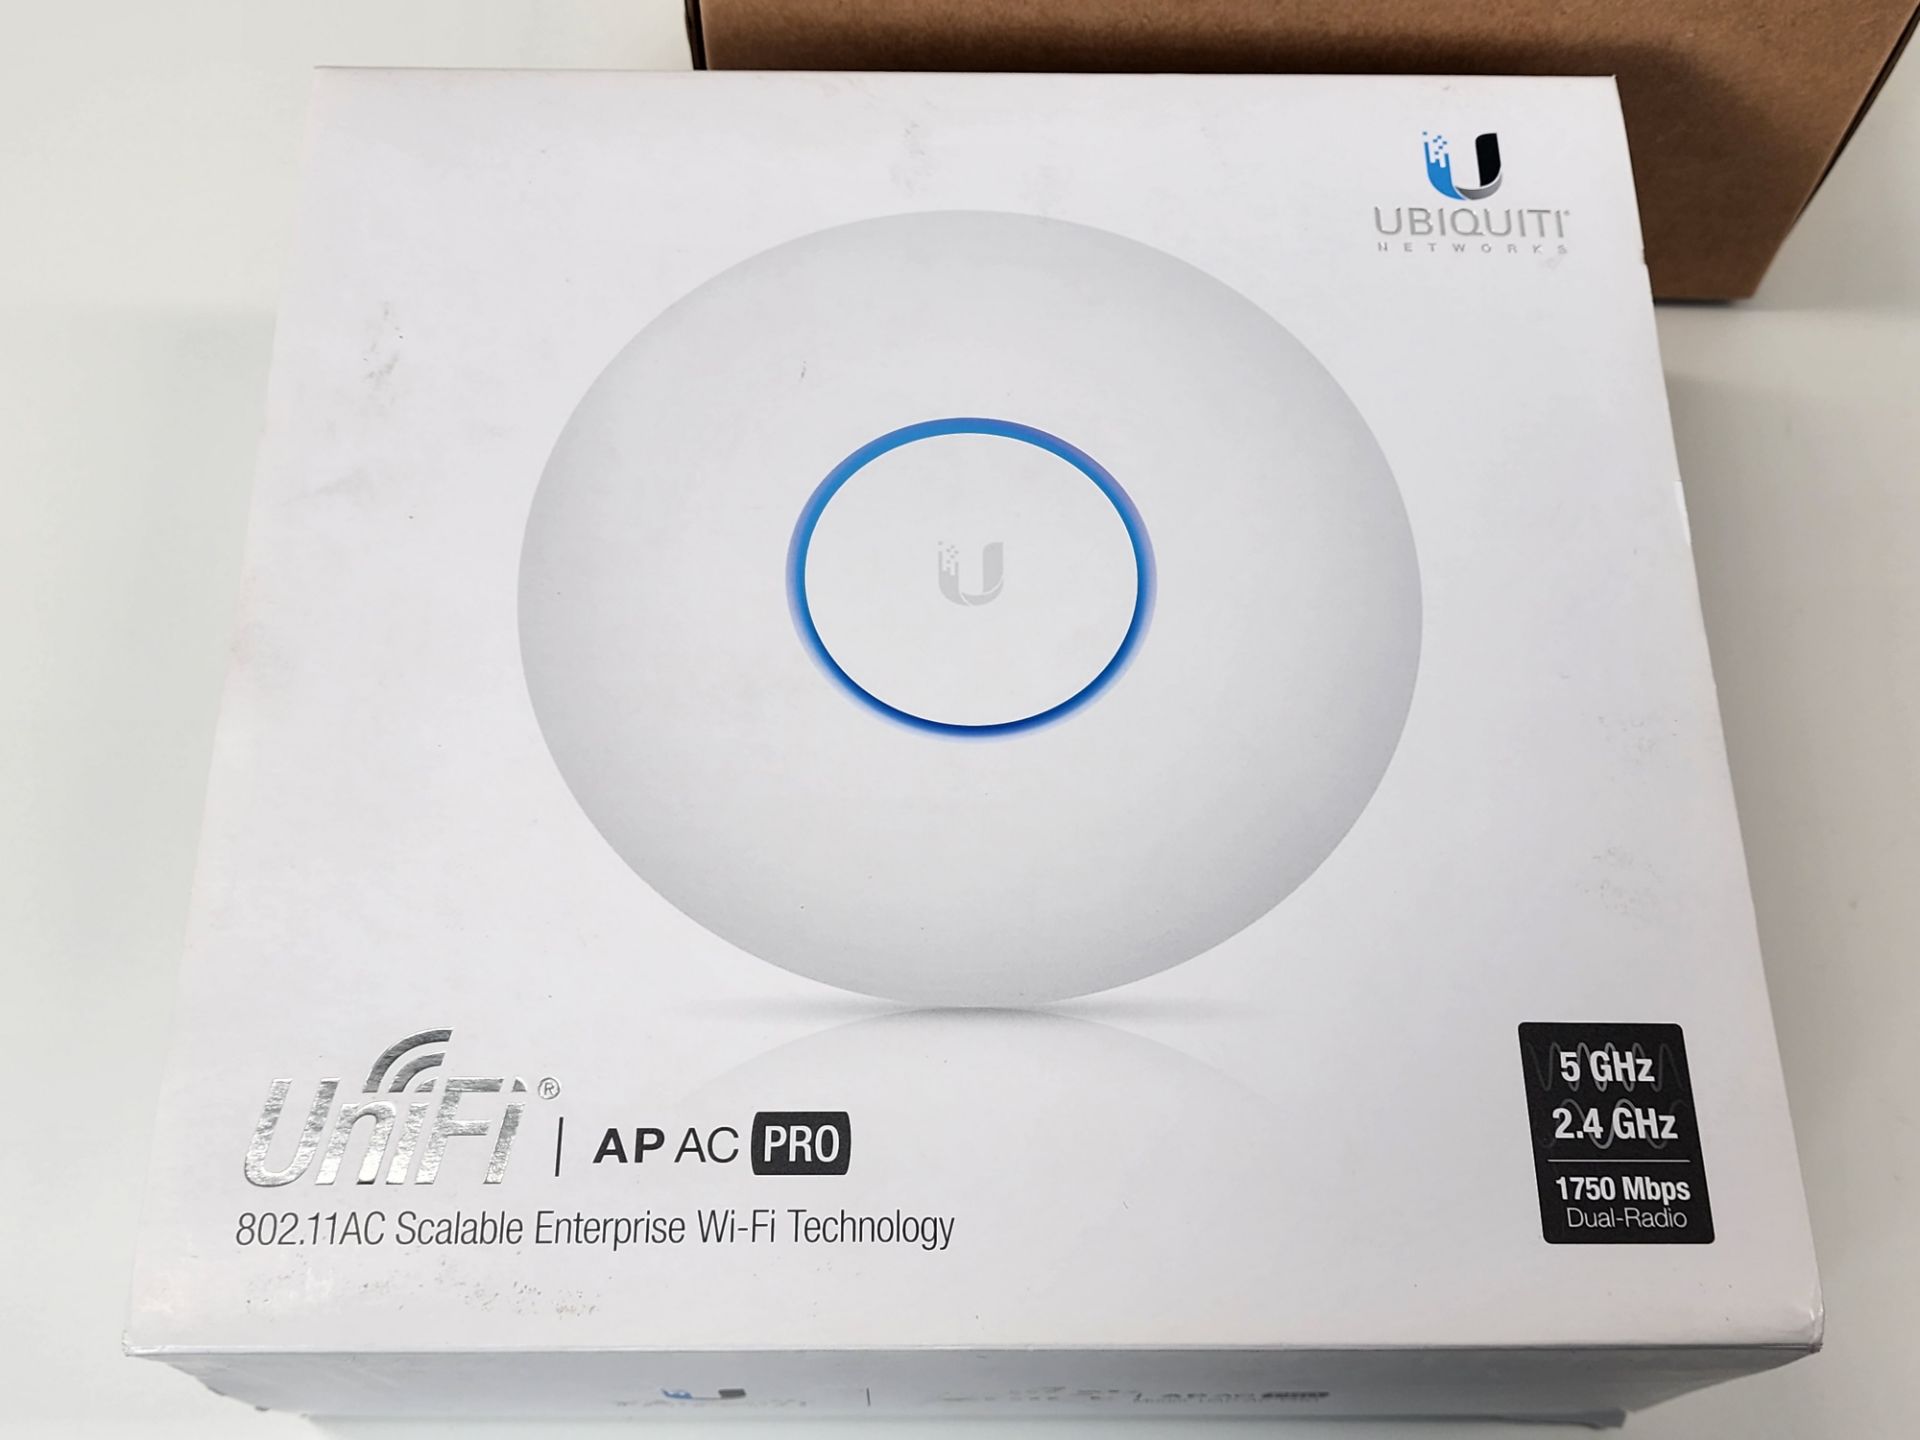 Ubiquiti UniFi Model UAP-AC-Pro Dual Band Access Point, 2.4 GHz & 5 GHz Bands, w/Ceiling & Wall